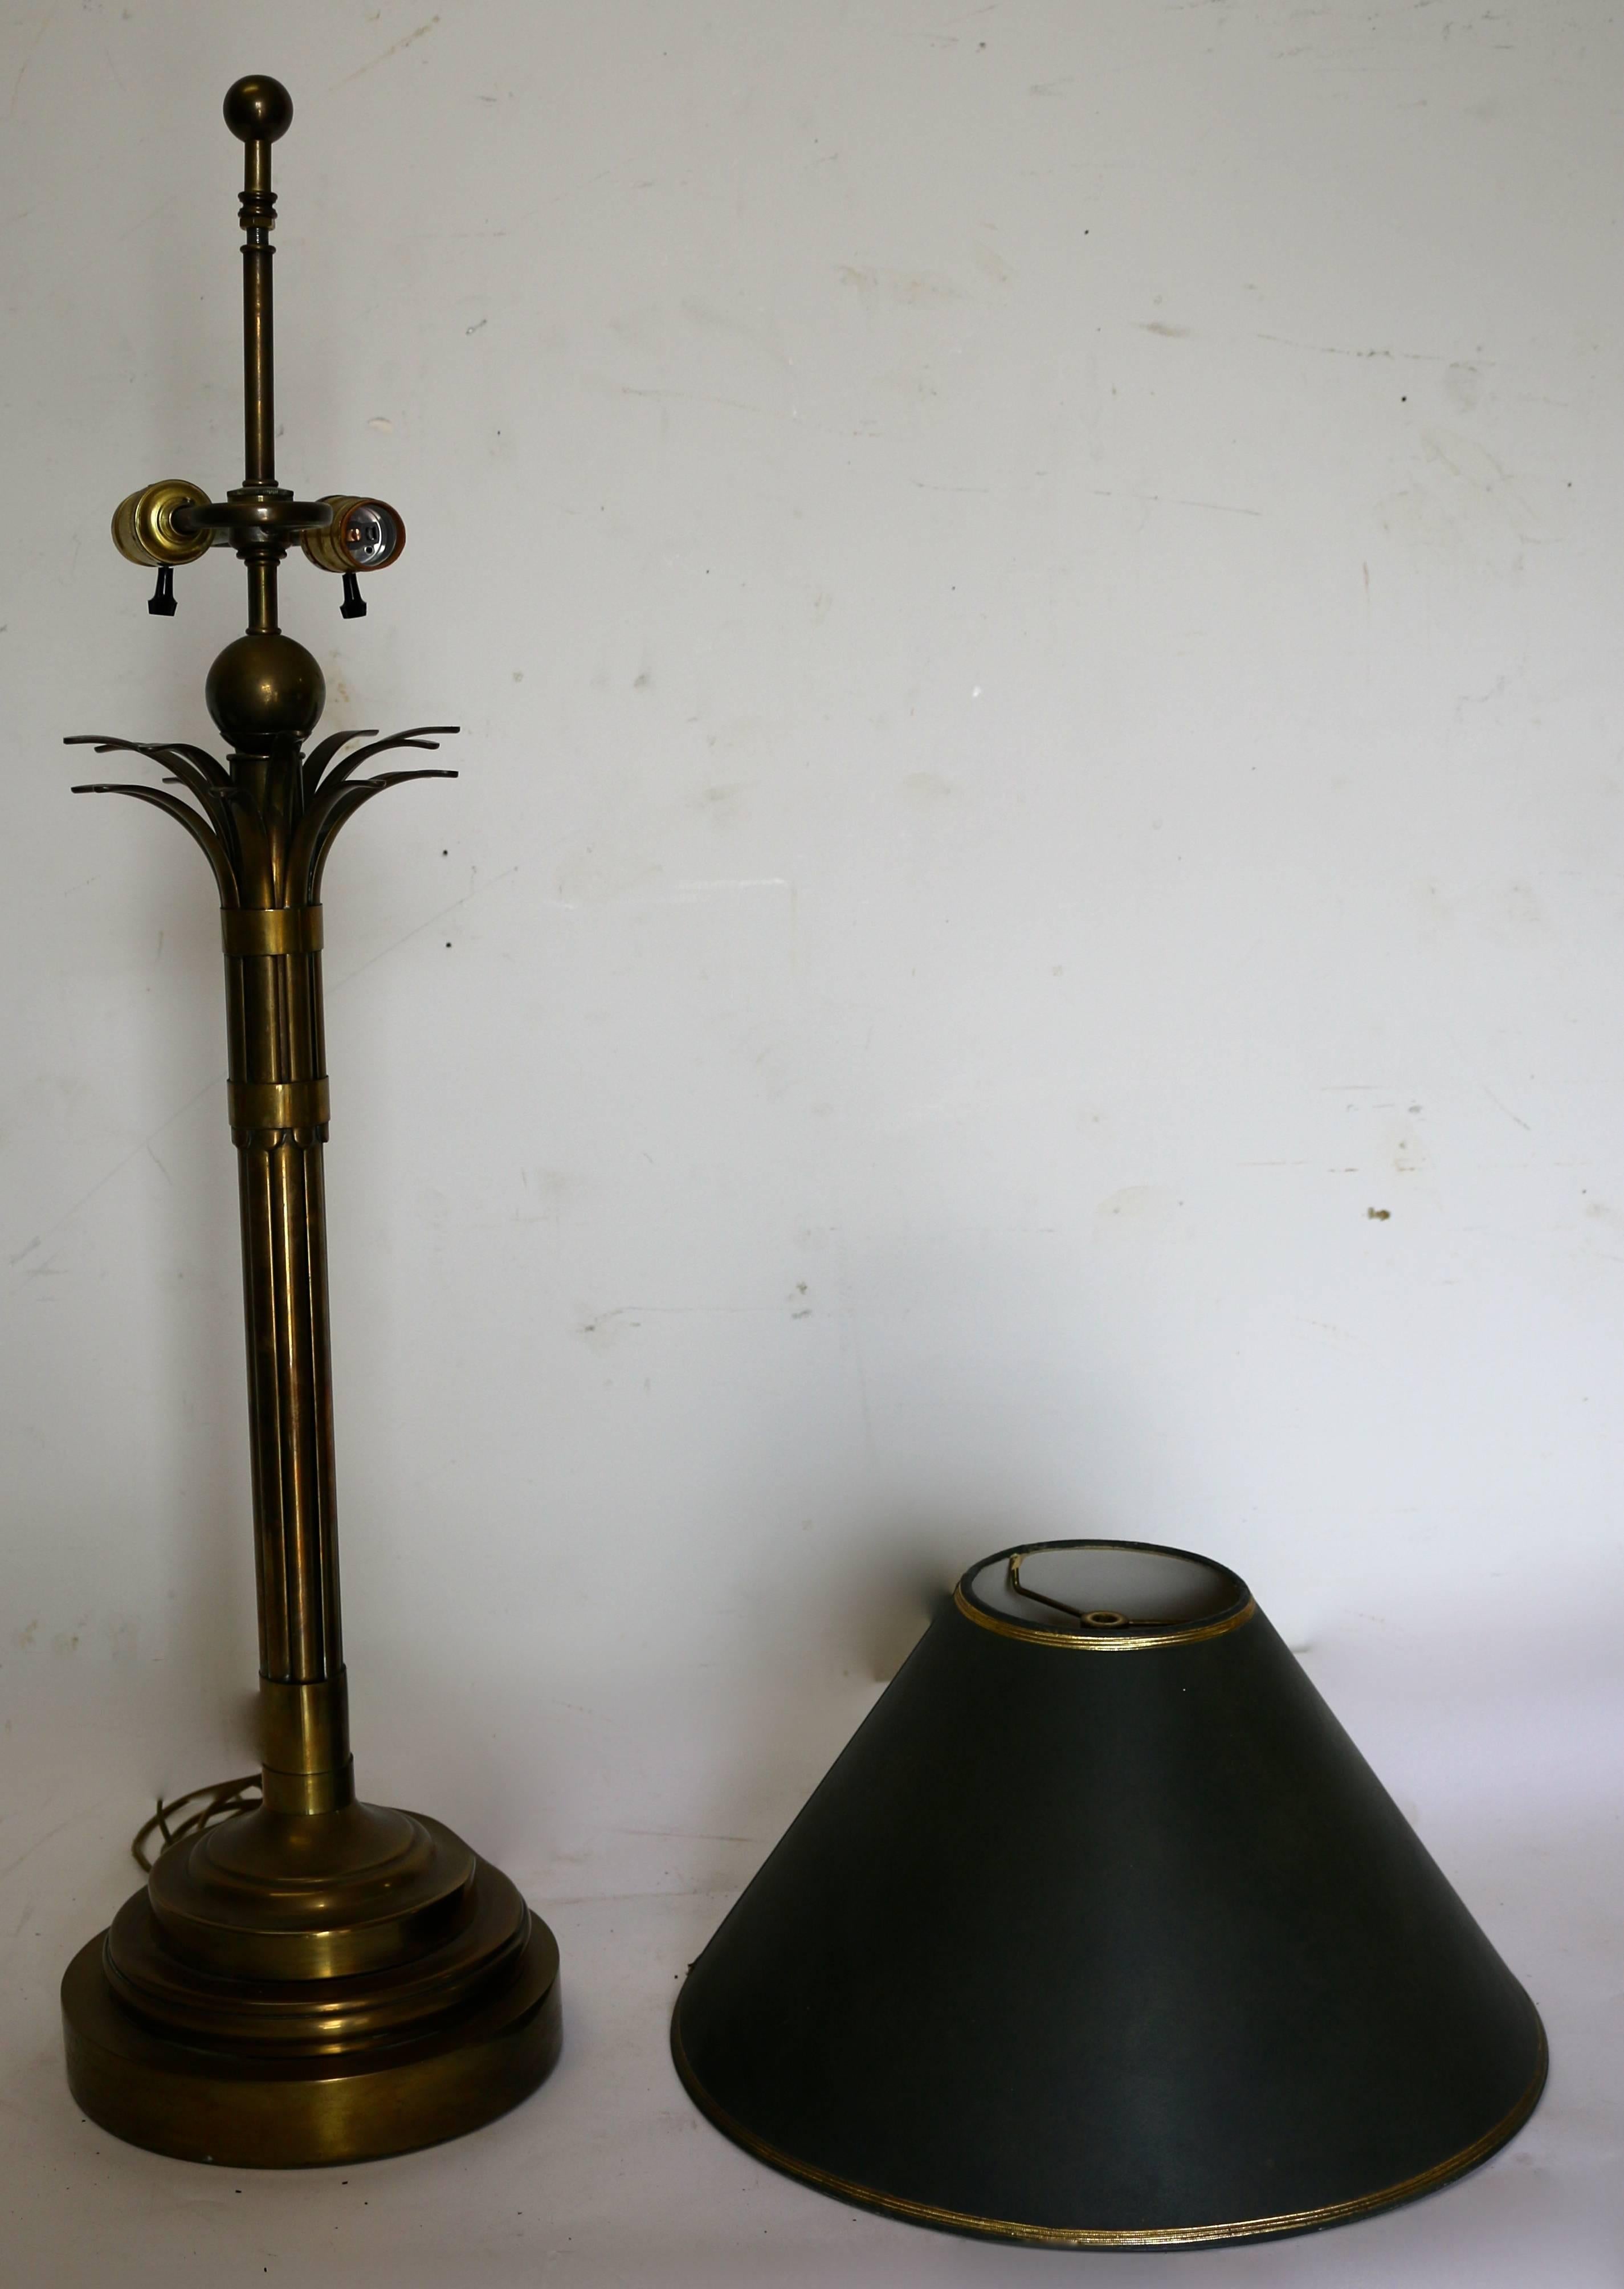 A Mid Century, Modern Brass Stylized Palm Tree Table lamp.
a combination of Modern sensibility with a traditional subject.
In Excellent used condition.
Shade measurements are 16' w Bottom and 5.5'top.